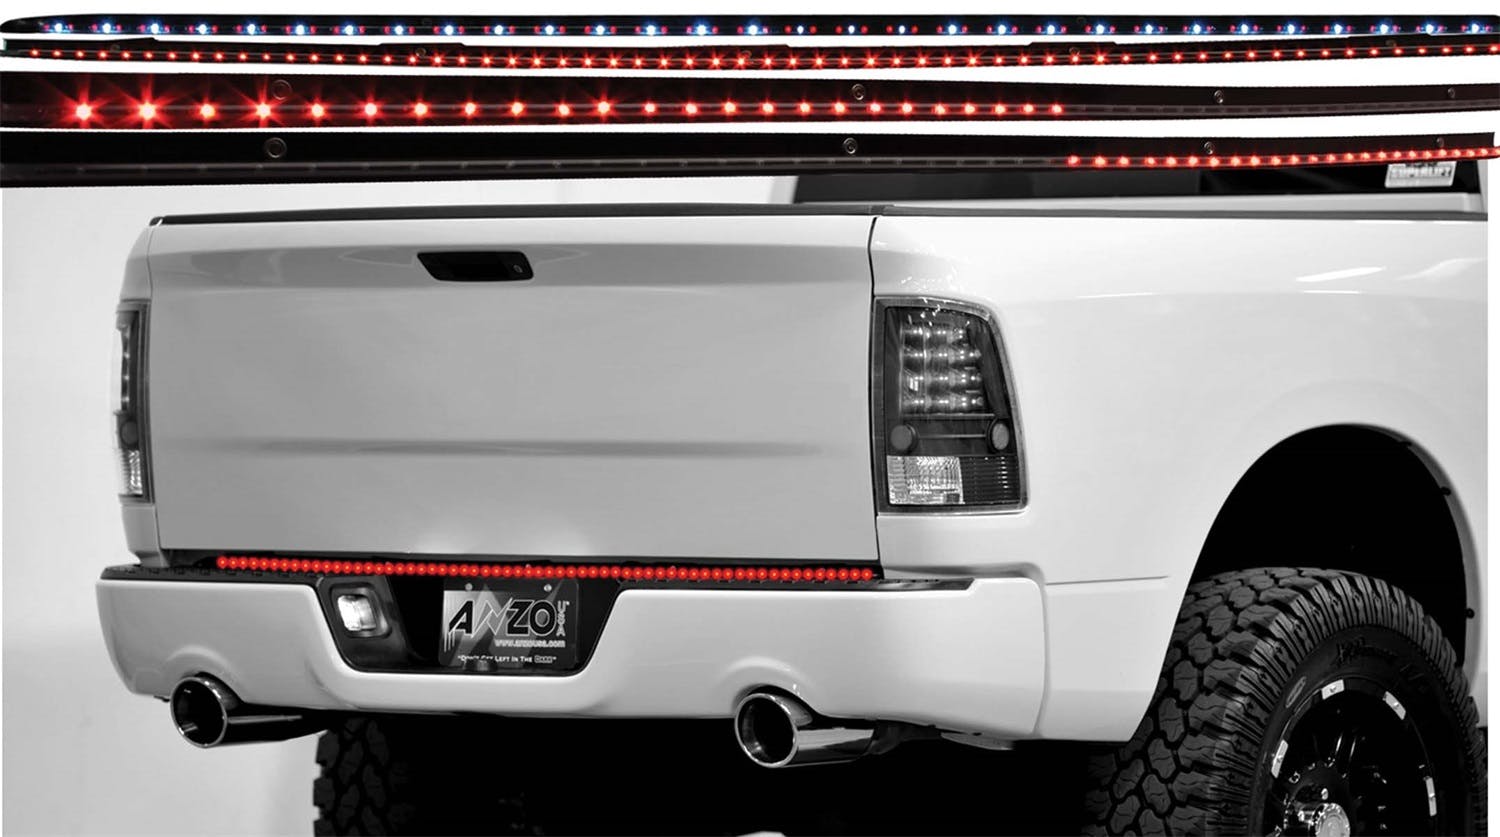 AnzoUSA 531005 LED Tailgate Bar with Reverse, 49" 5 Function